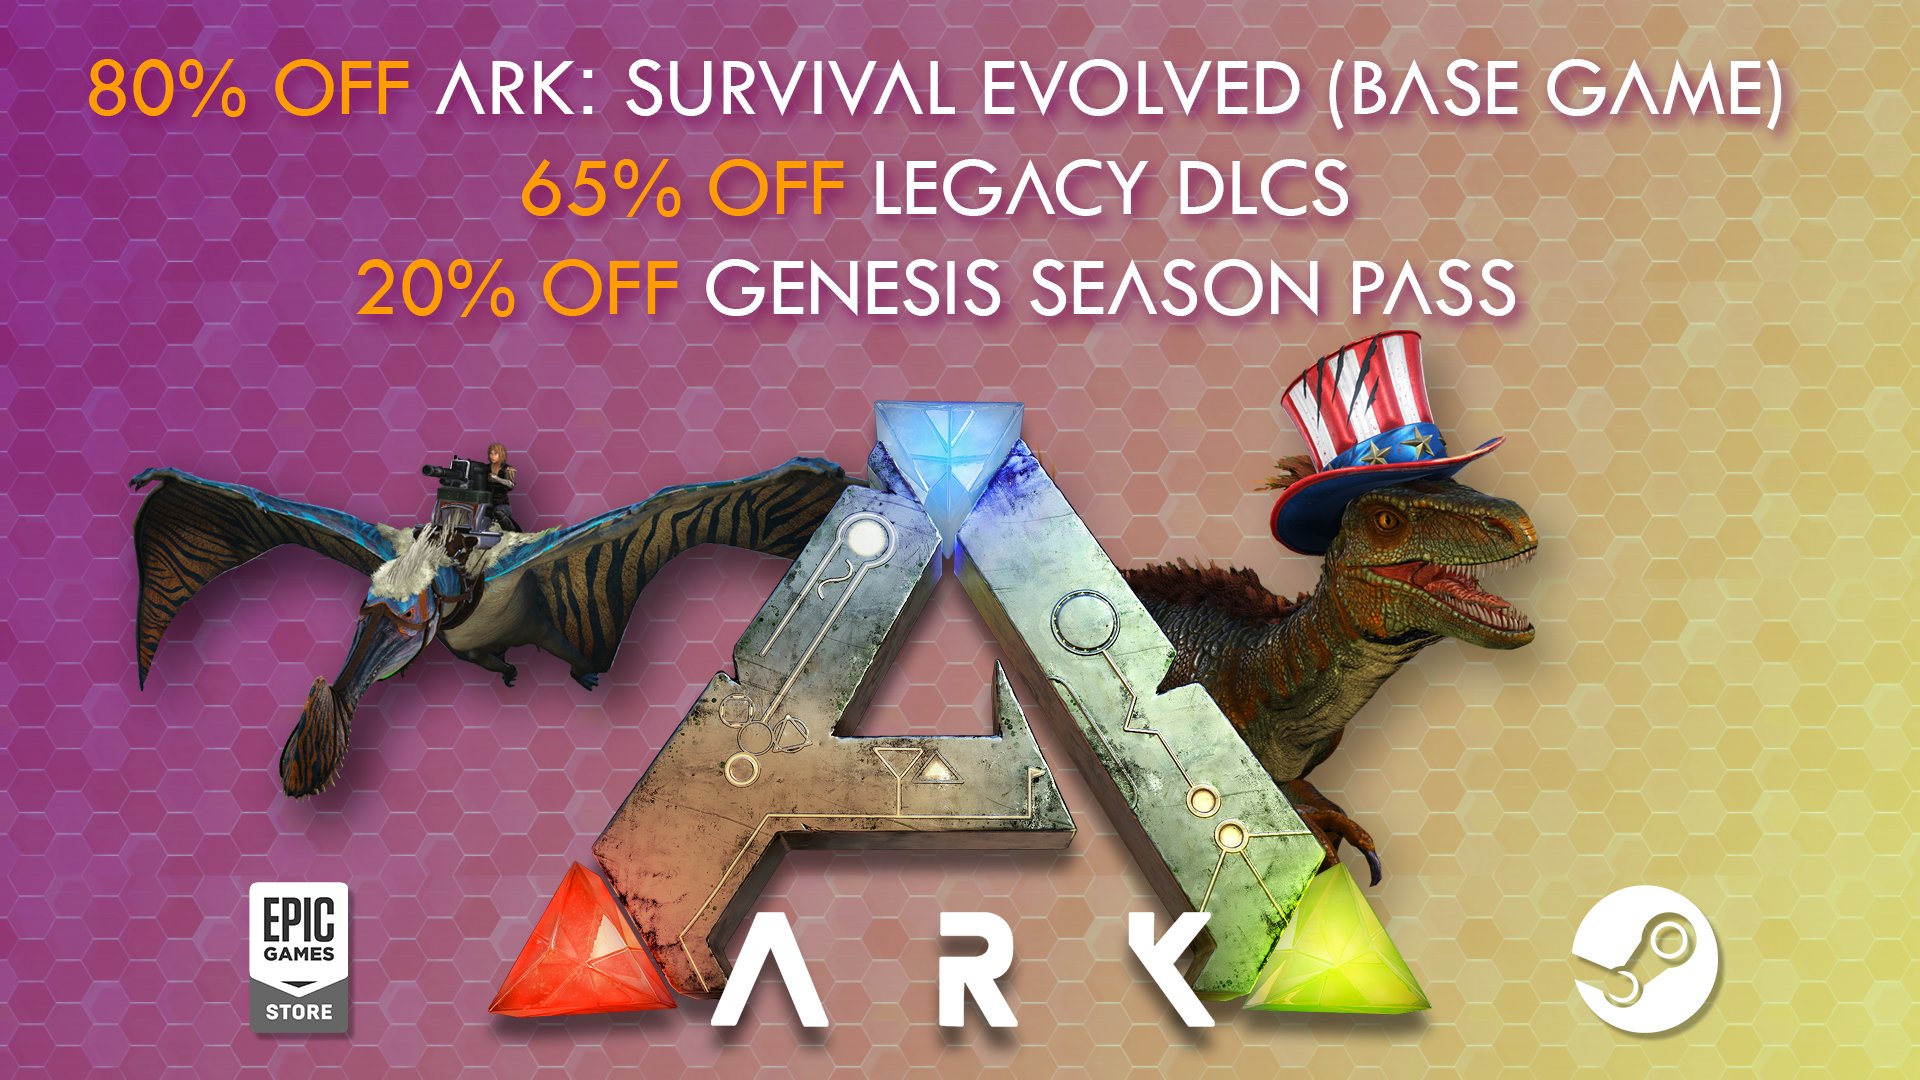 Ark Survival Evolved Looking For A Summer Escape With The Summer Bash Event And Ark Being Up To 80 Off On Steam And The Epic Games Store You Won T Need